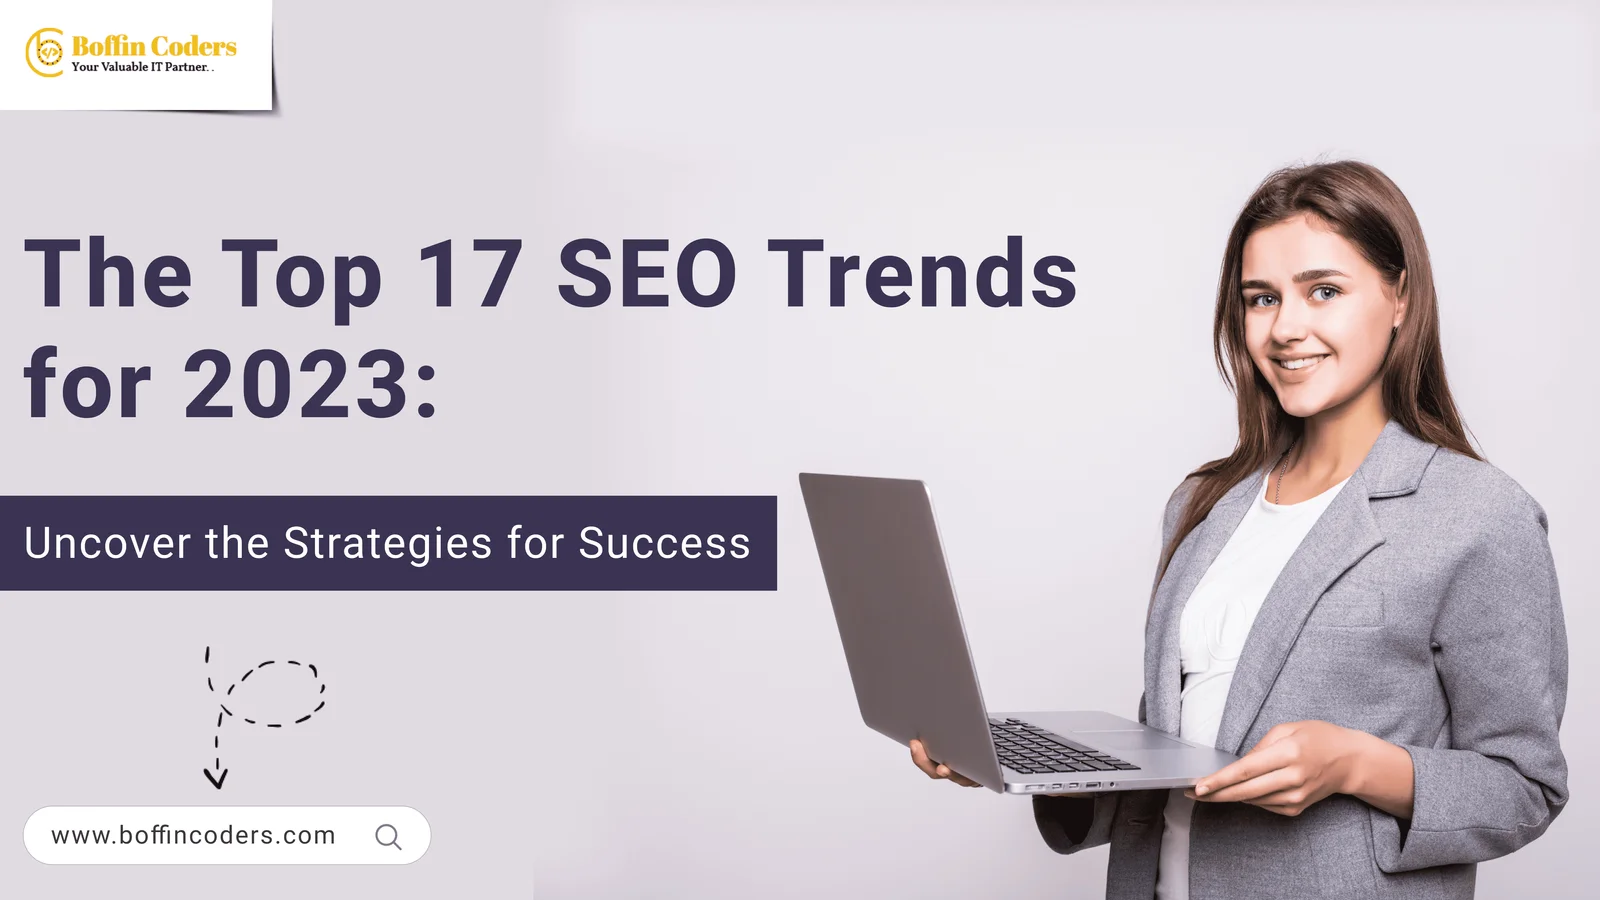 The Top 17 SEO Trends for 2023: Uncover the Strategies for Success